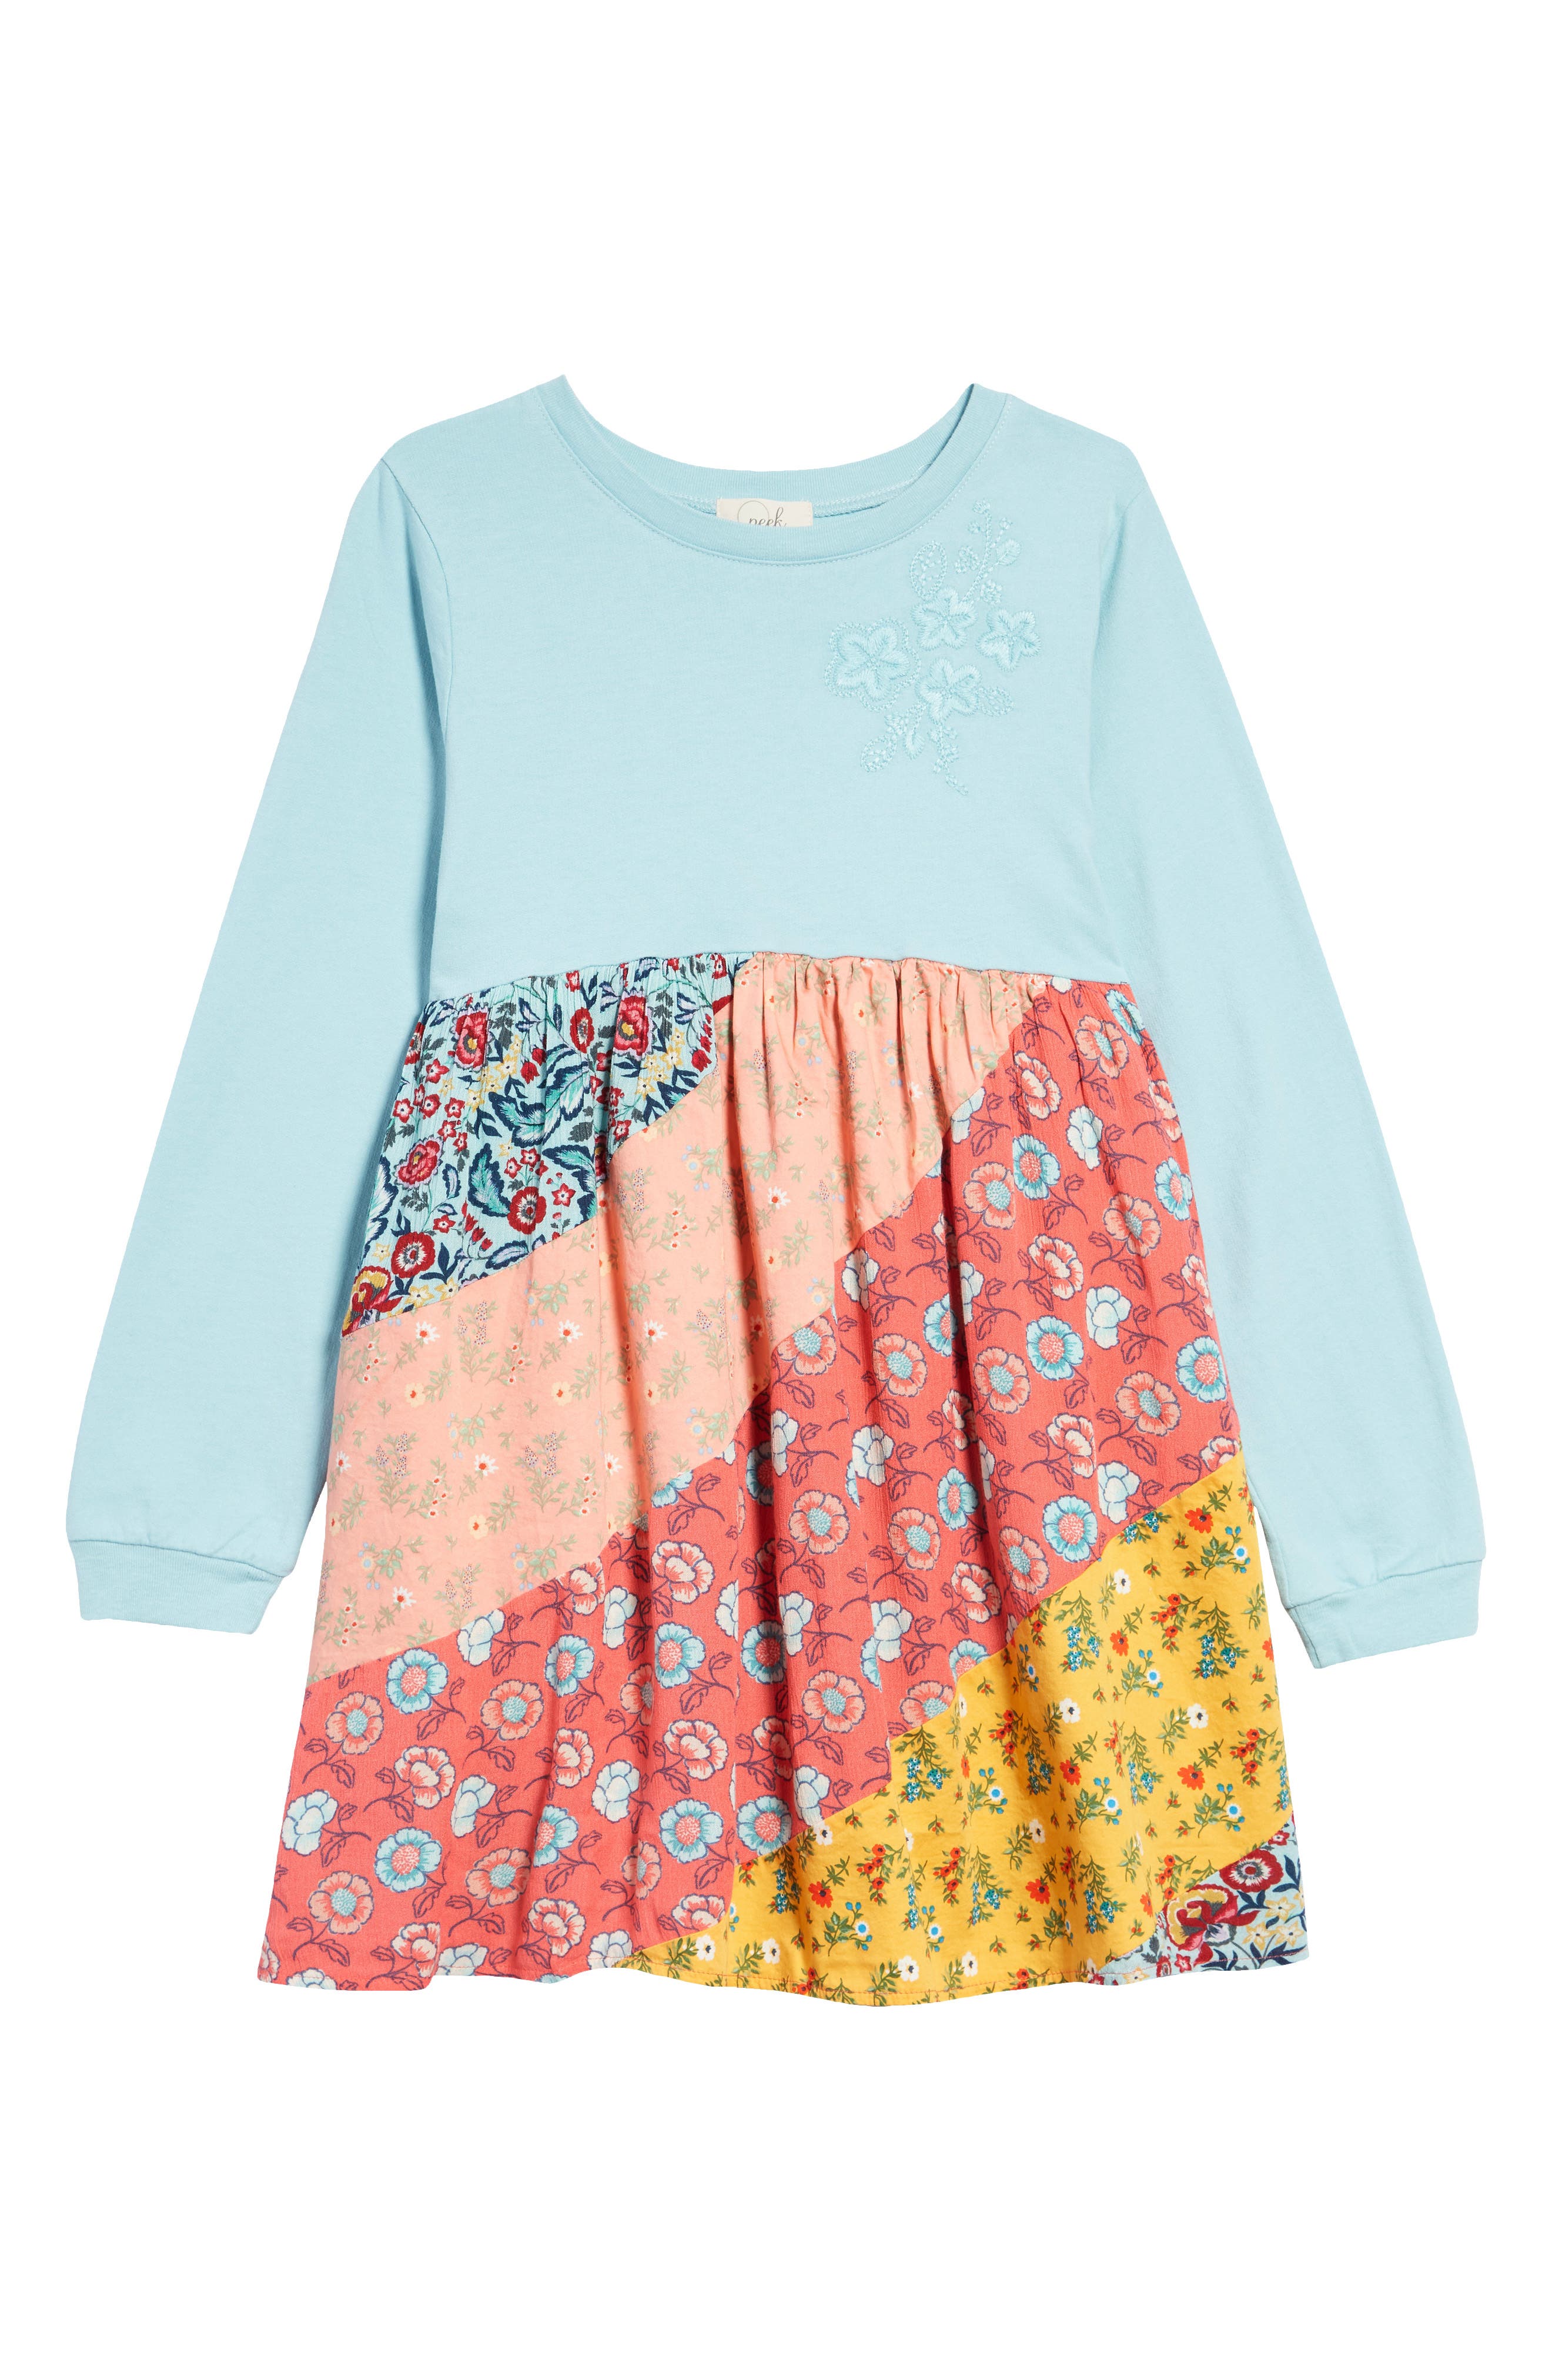 Nordstrom Clothing Dresses Knitted Dresses Kids Mixed Print Knit Dress in Multi at Nordstrom 